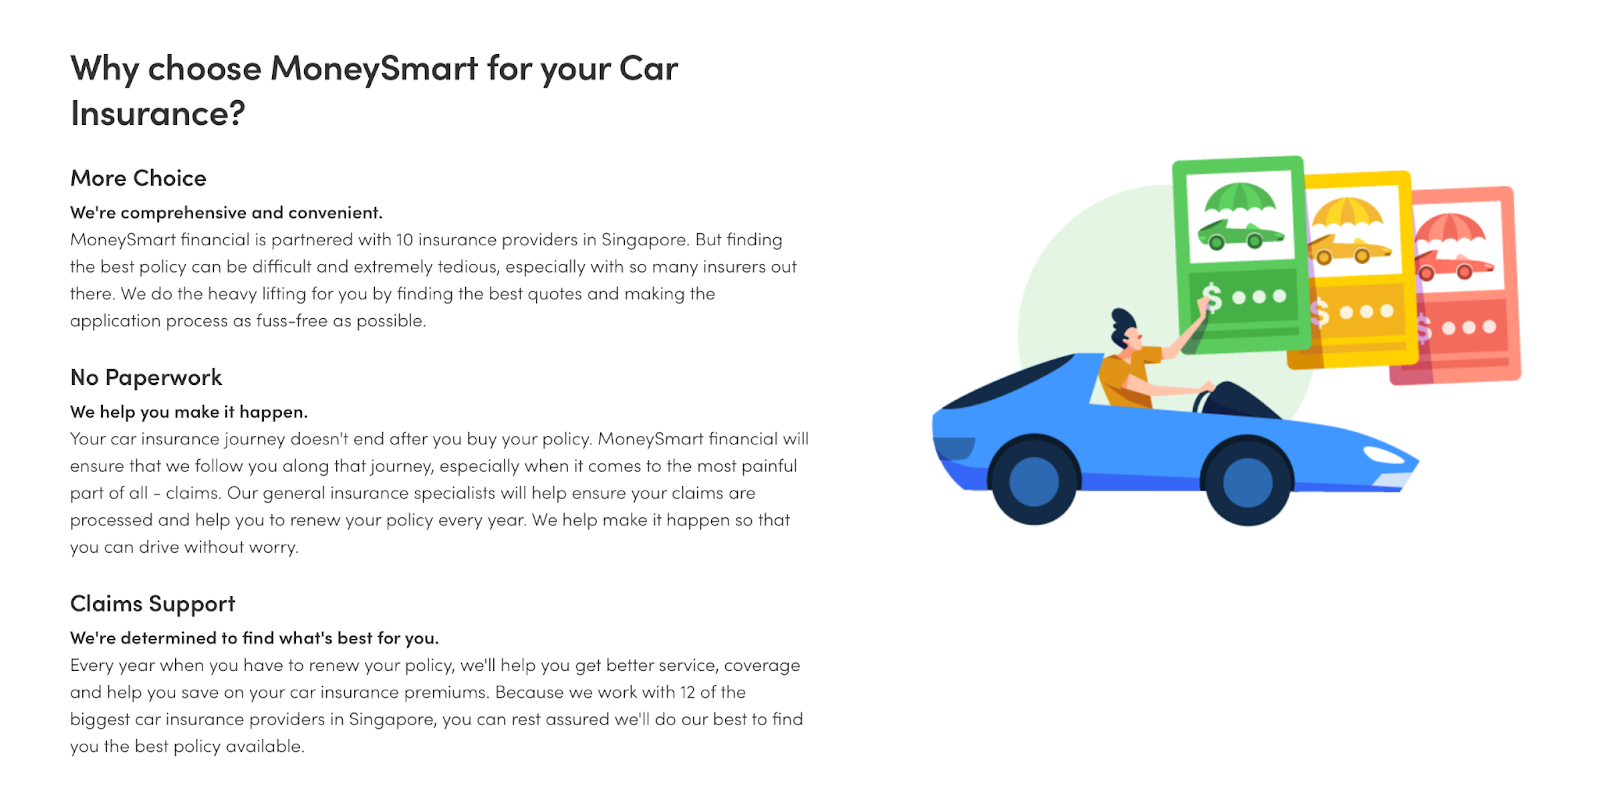 A screenshot from MoneySmart's website. It contains text that describes why MoneySmart is the best way to find car insurance.